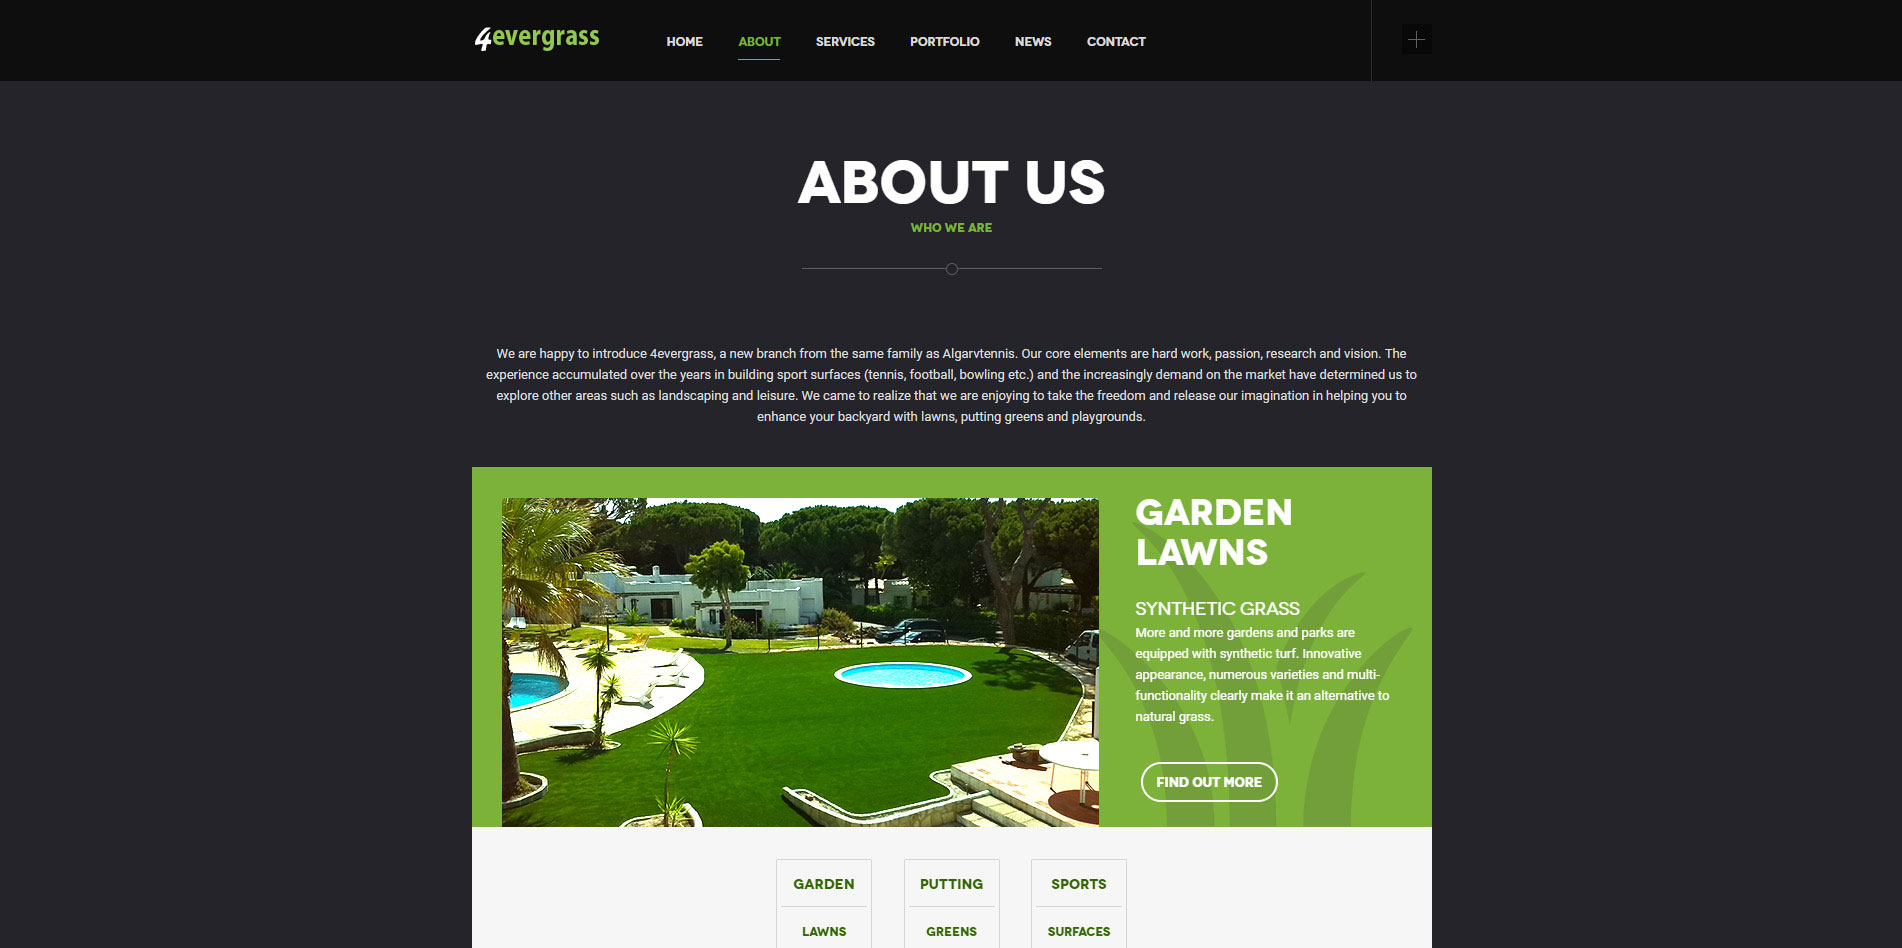 4evergrass website - about us page